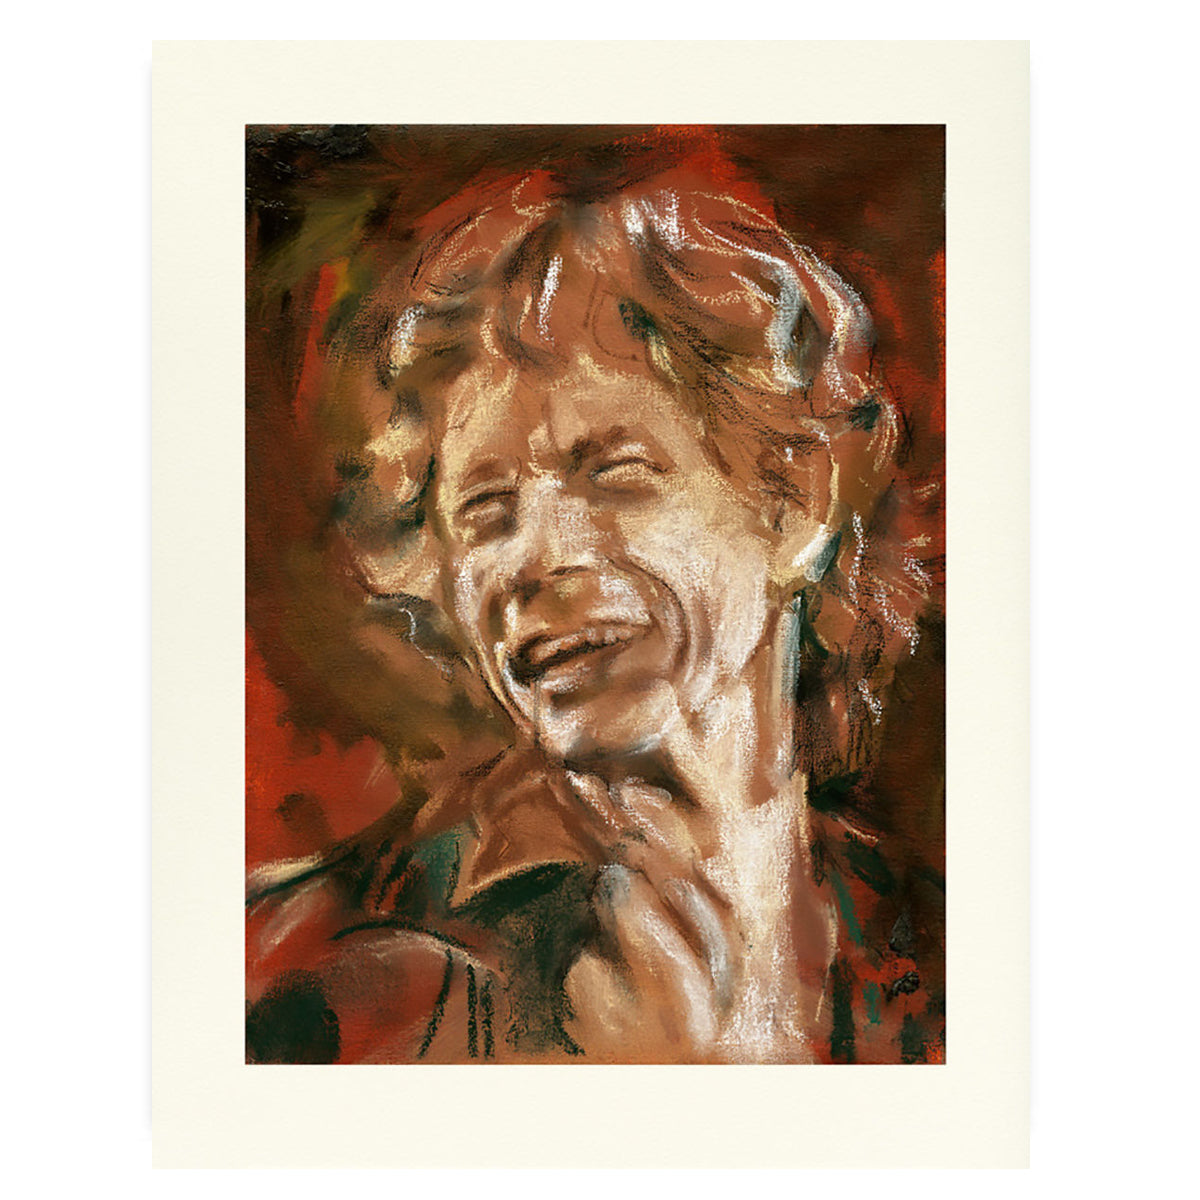 Ronnie Wood - Wall Study - Mick 2021 Edition